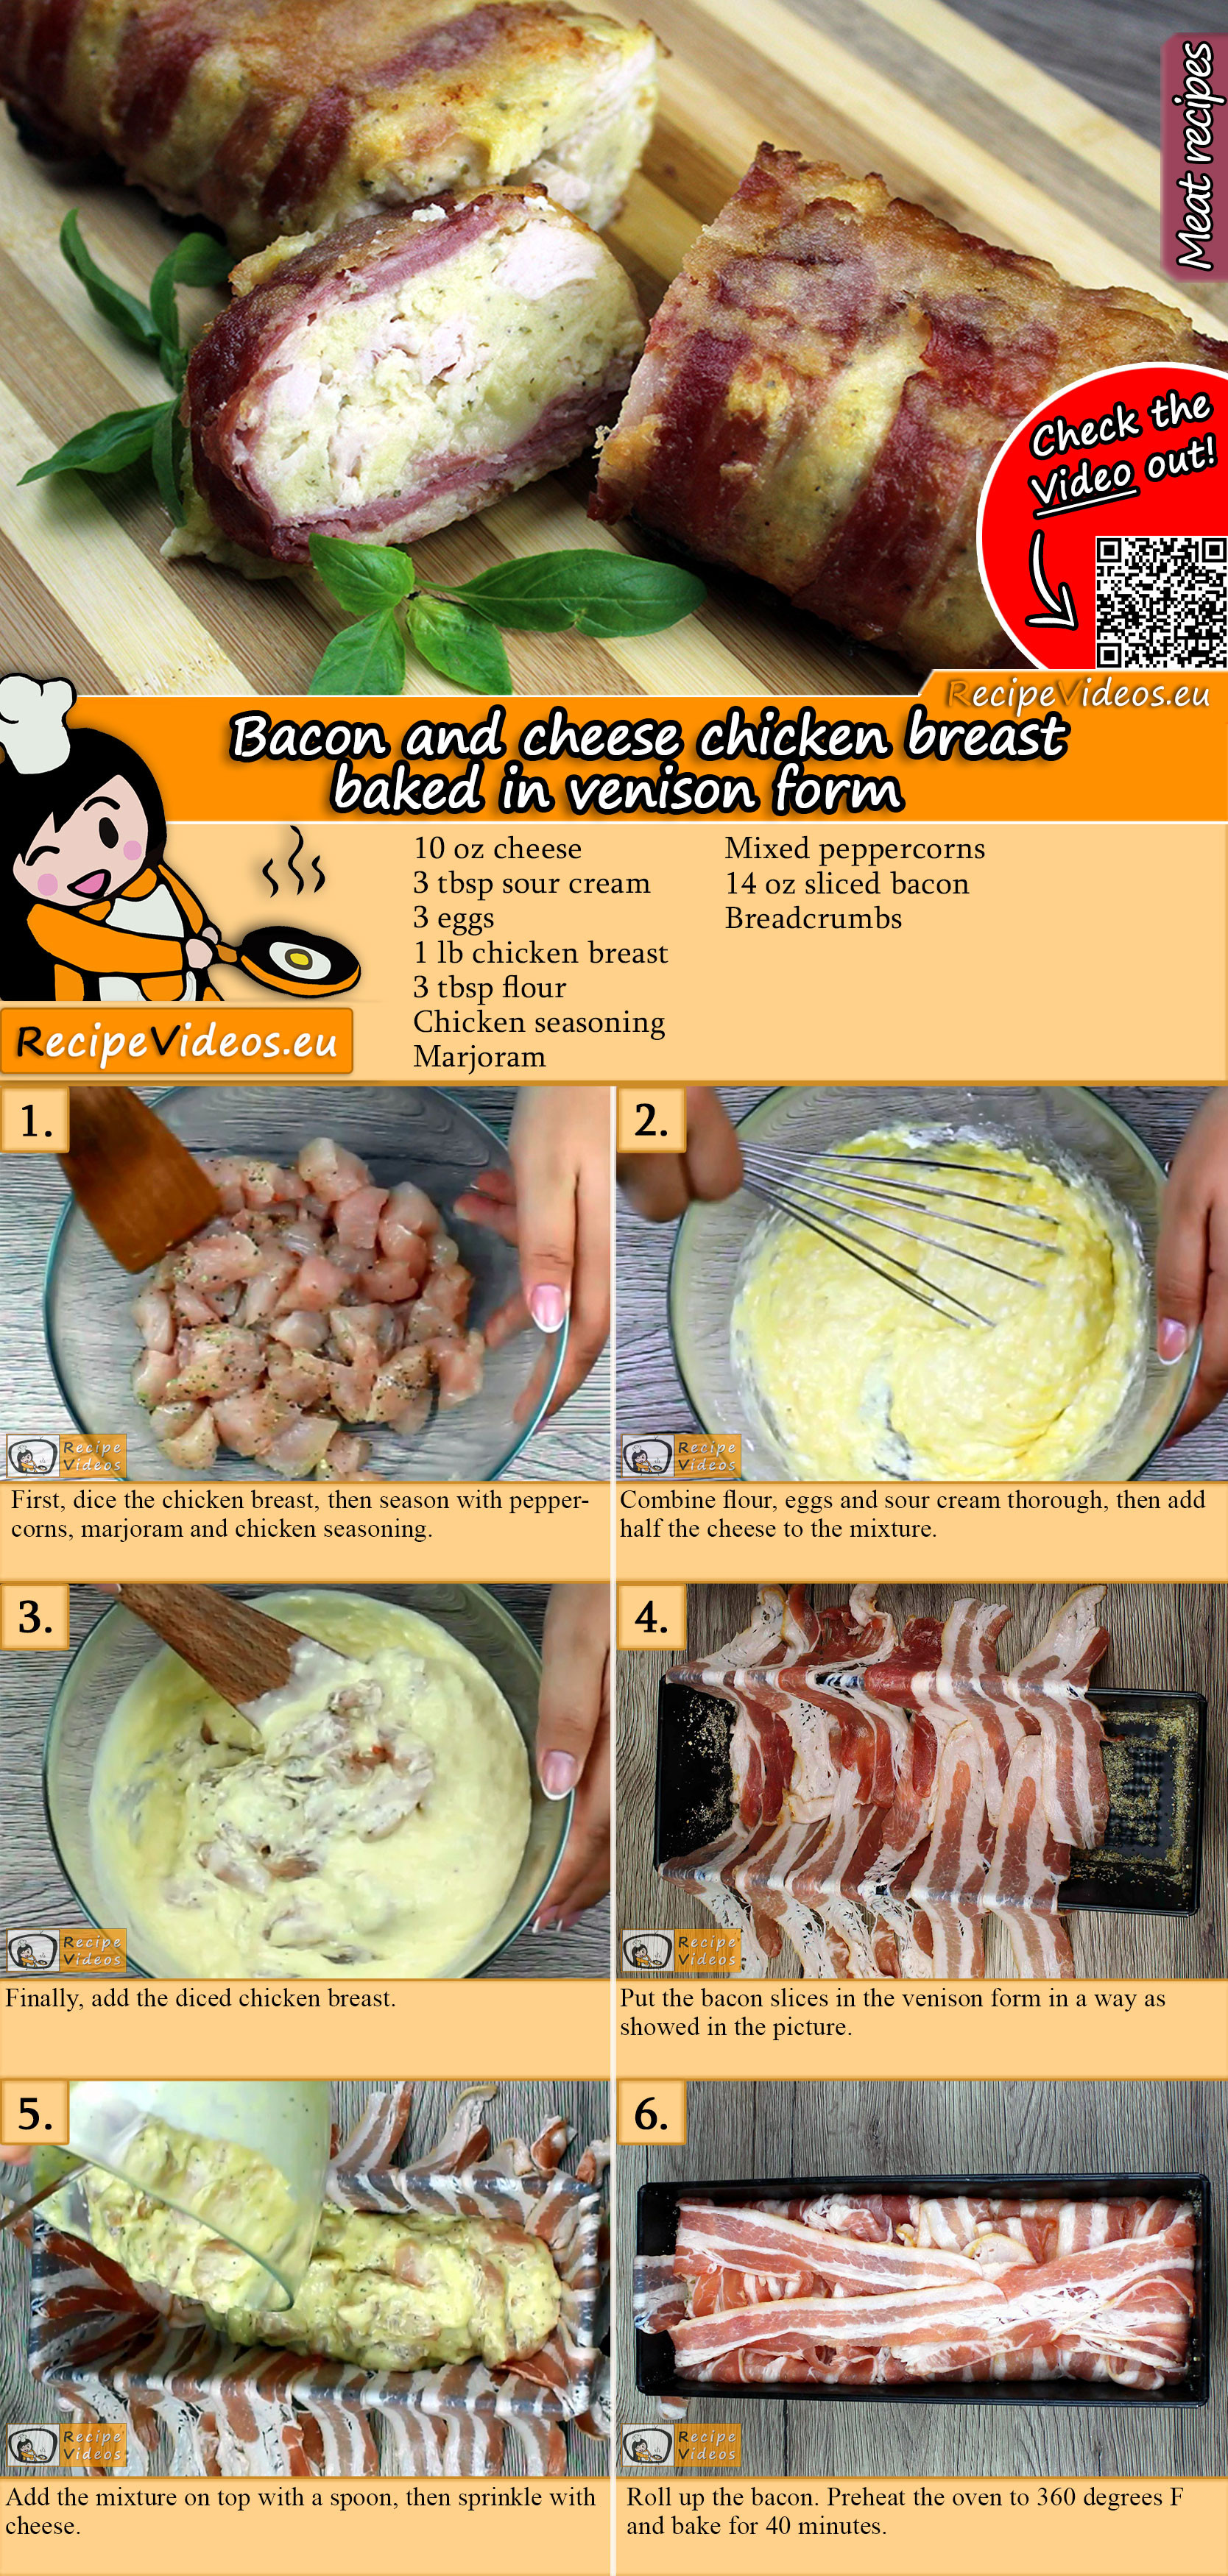 Bacon and cheese chicken breast baked in venison form recipe with video